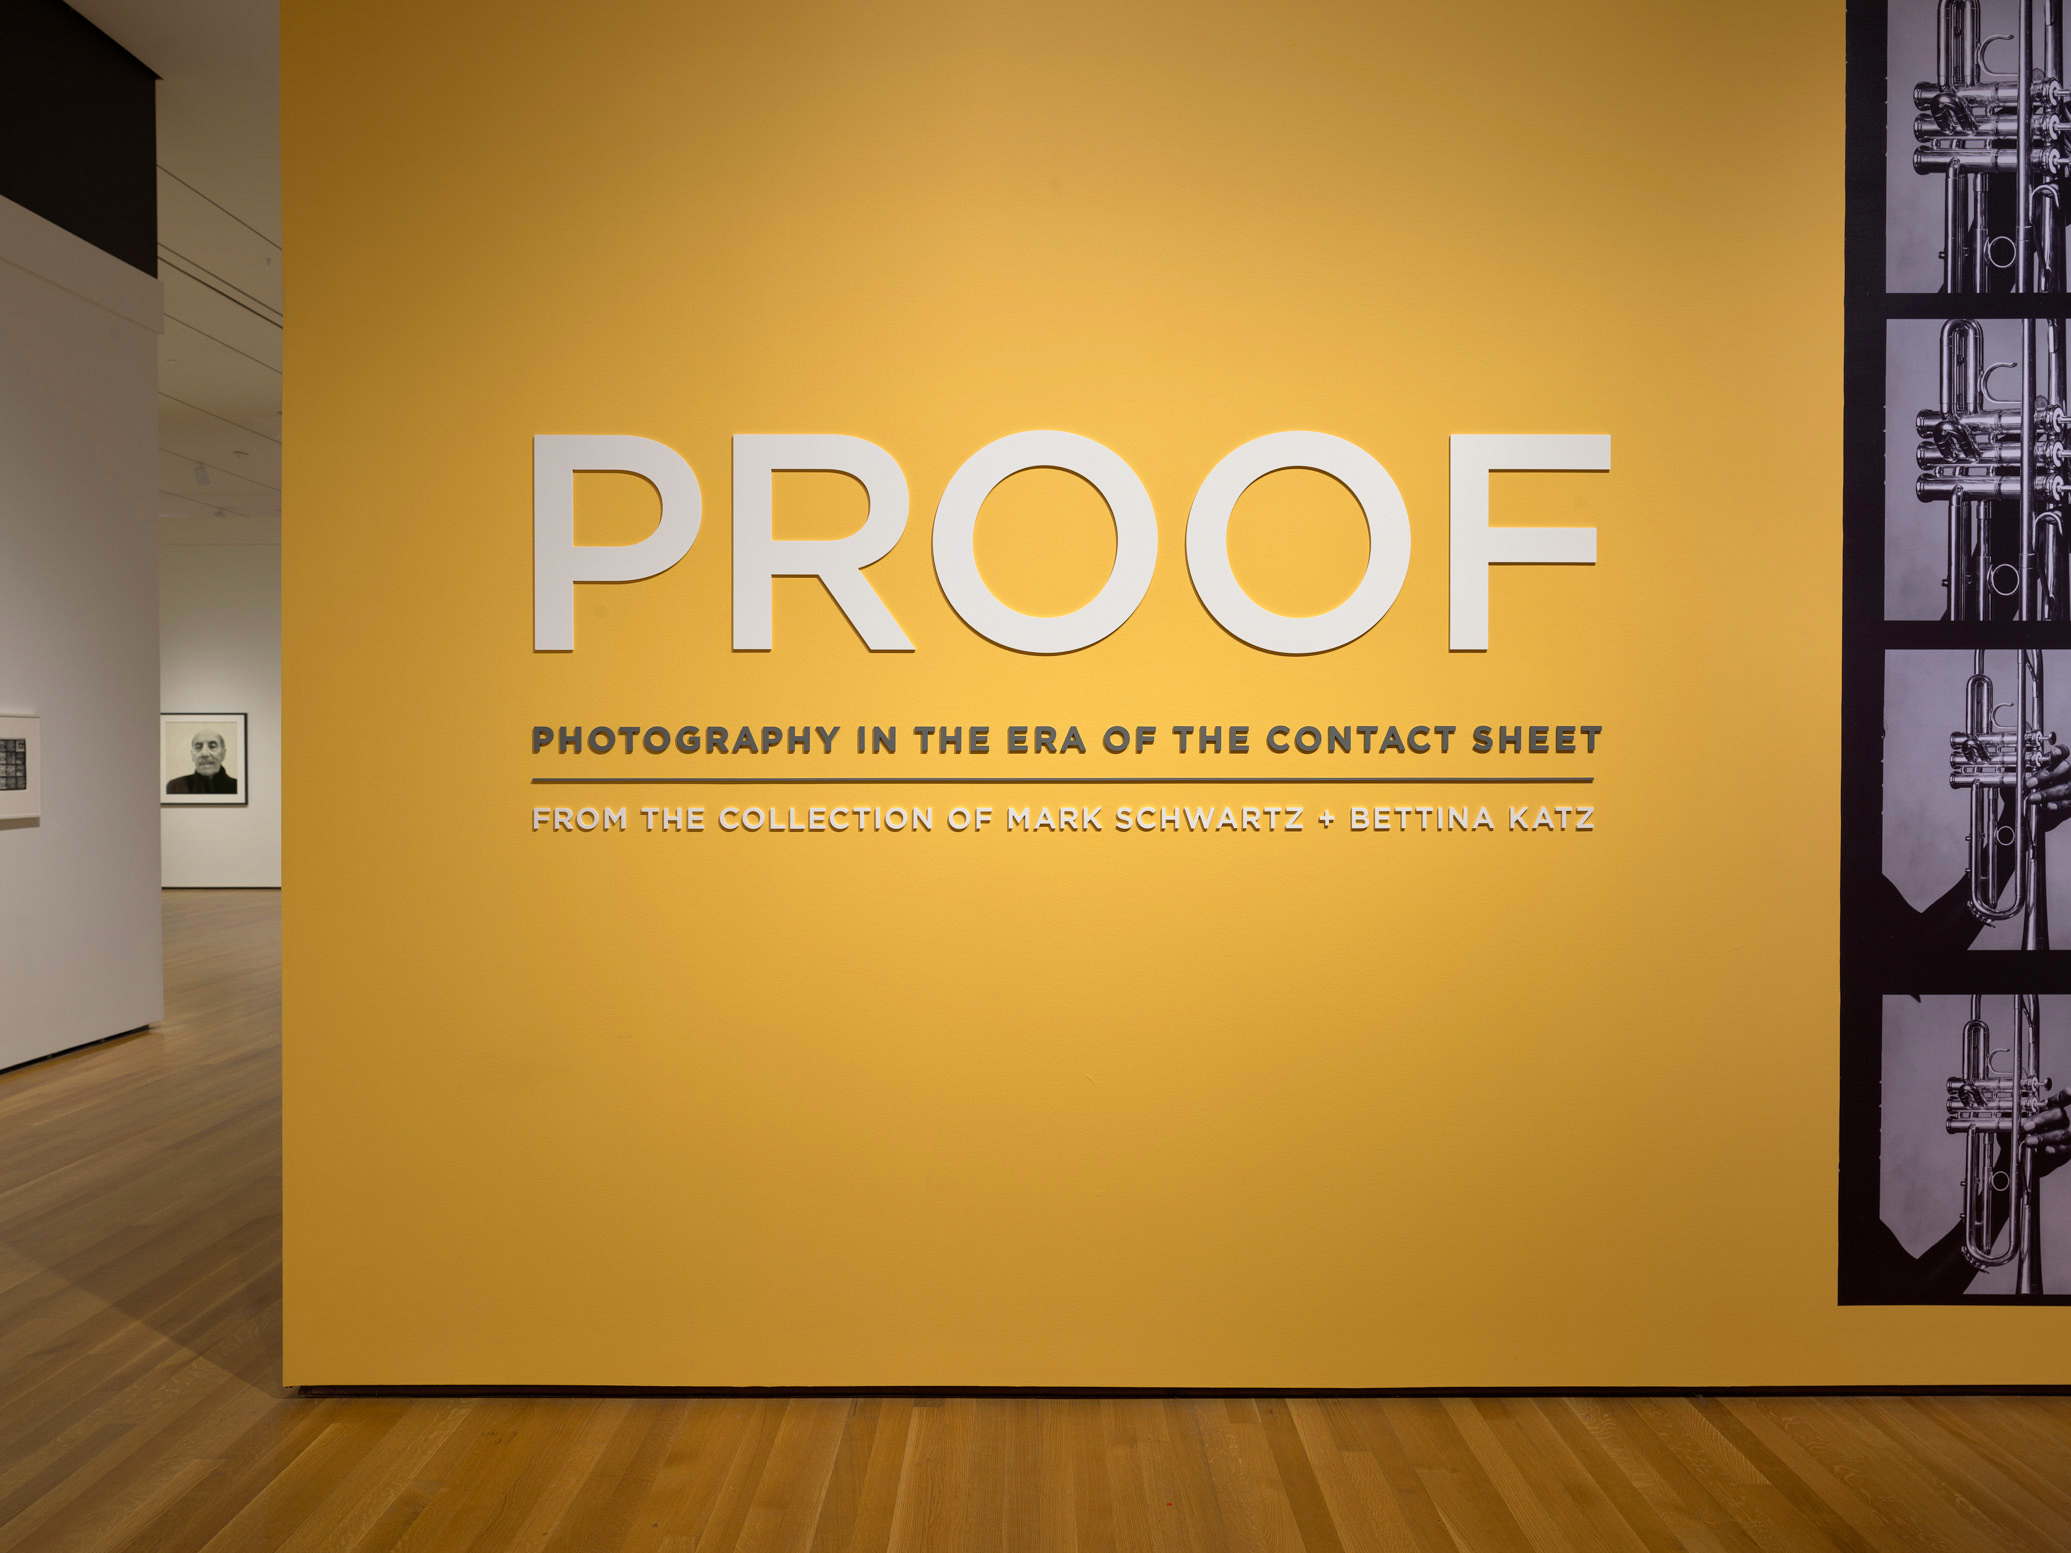 PROOF: Photography in the Era of the Contact Sheet branding at the exhibition entrance at the Cleveland Museum of Art